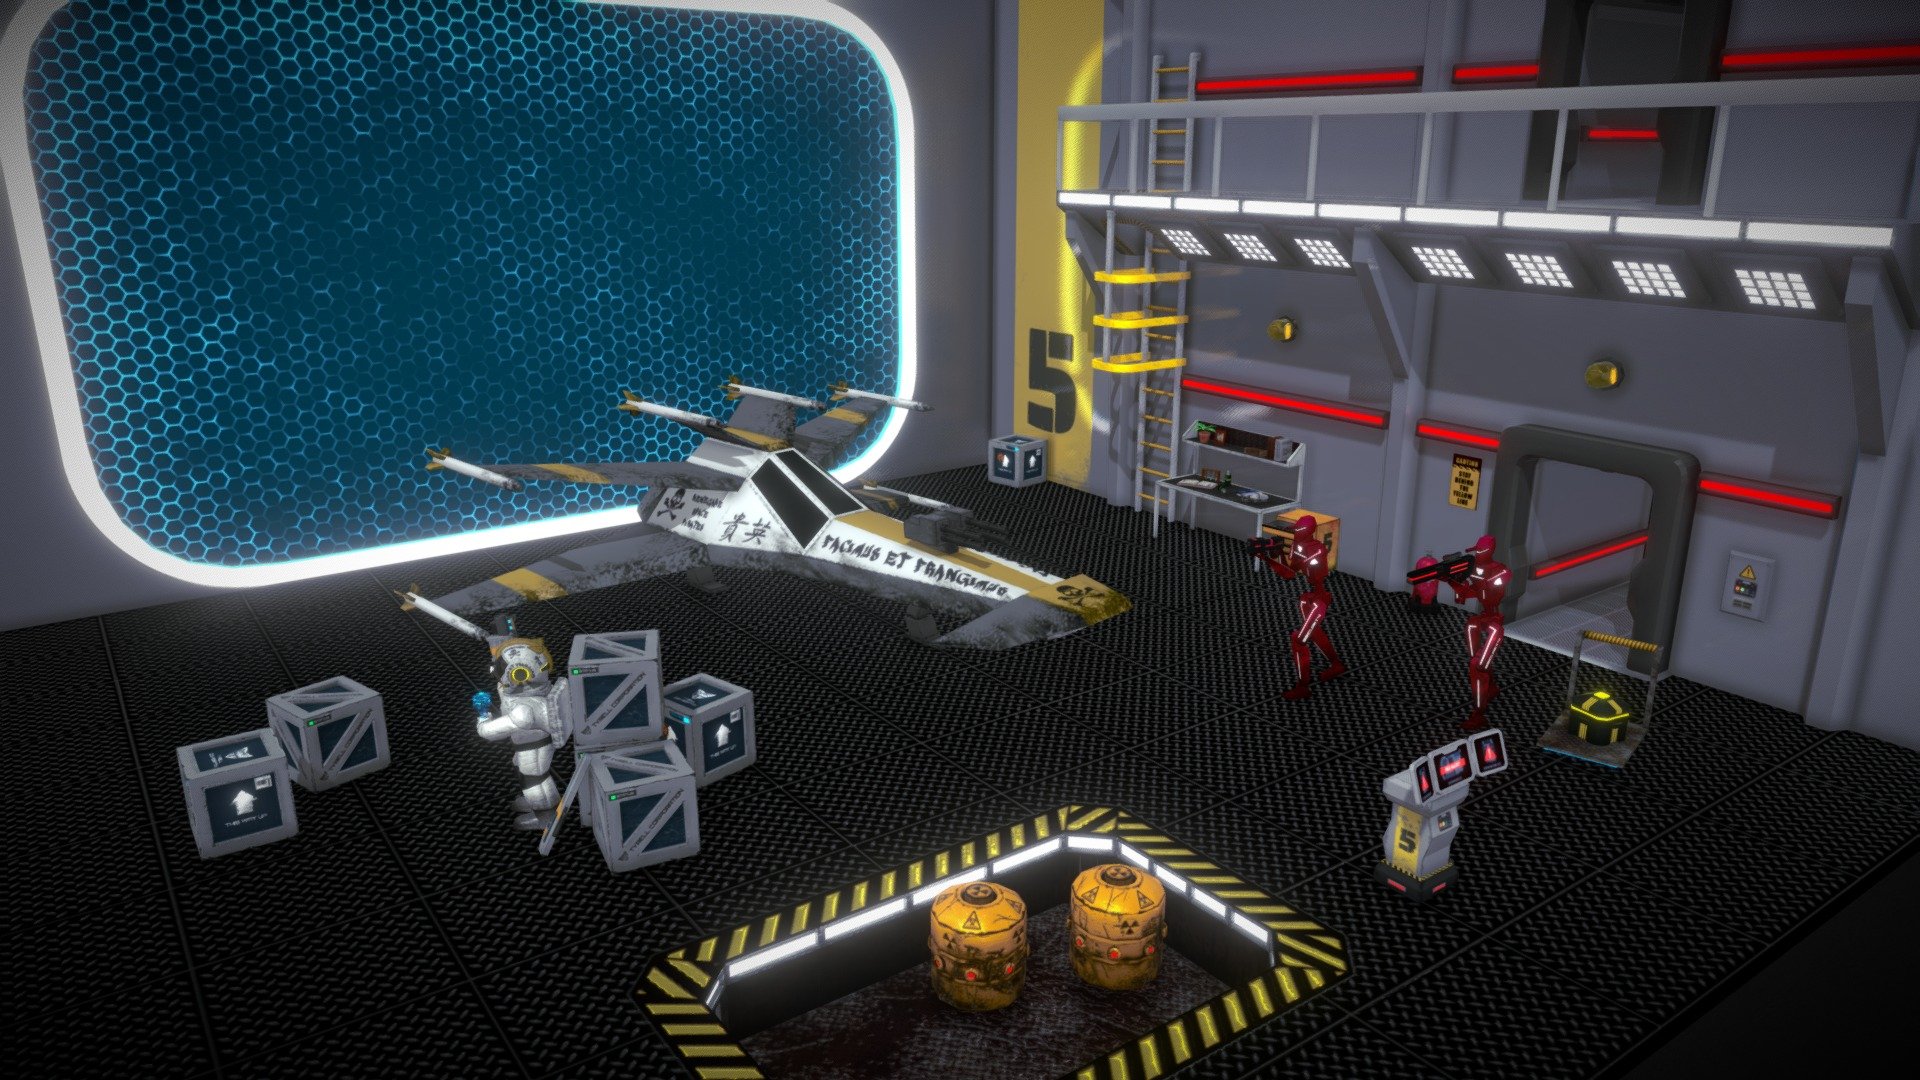 A Renegade Space Pirate has infiltrated docking bay number 5 in search for fortune. Robot security units have entered to take out the intruder. The Space Pirate is well-armed and is ready to unleash some destruction to achieve her objective 3d model